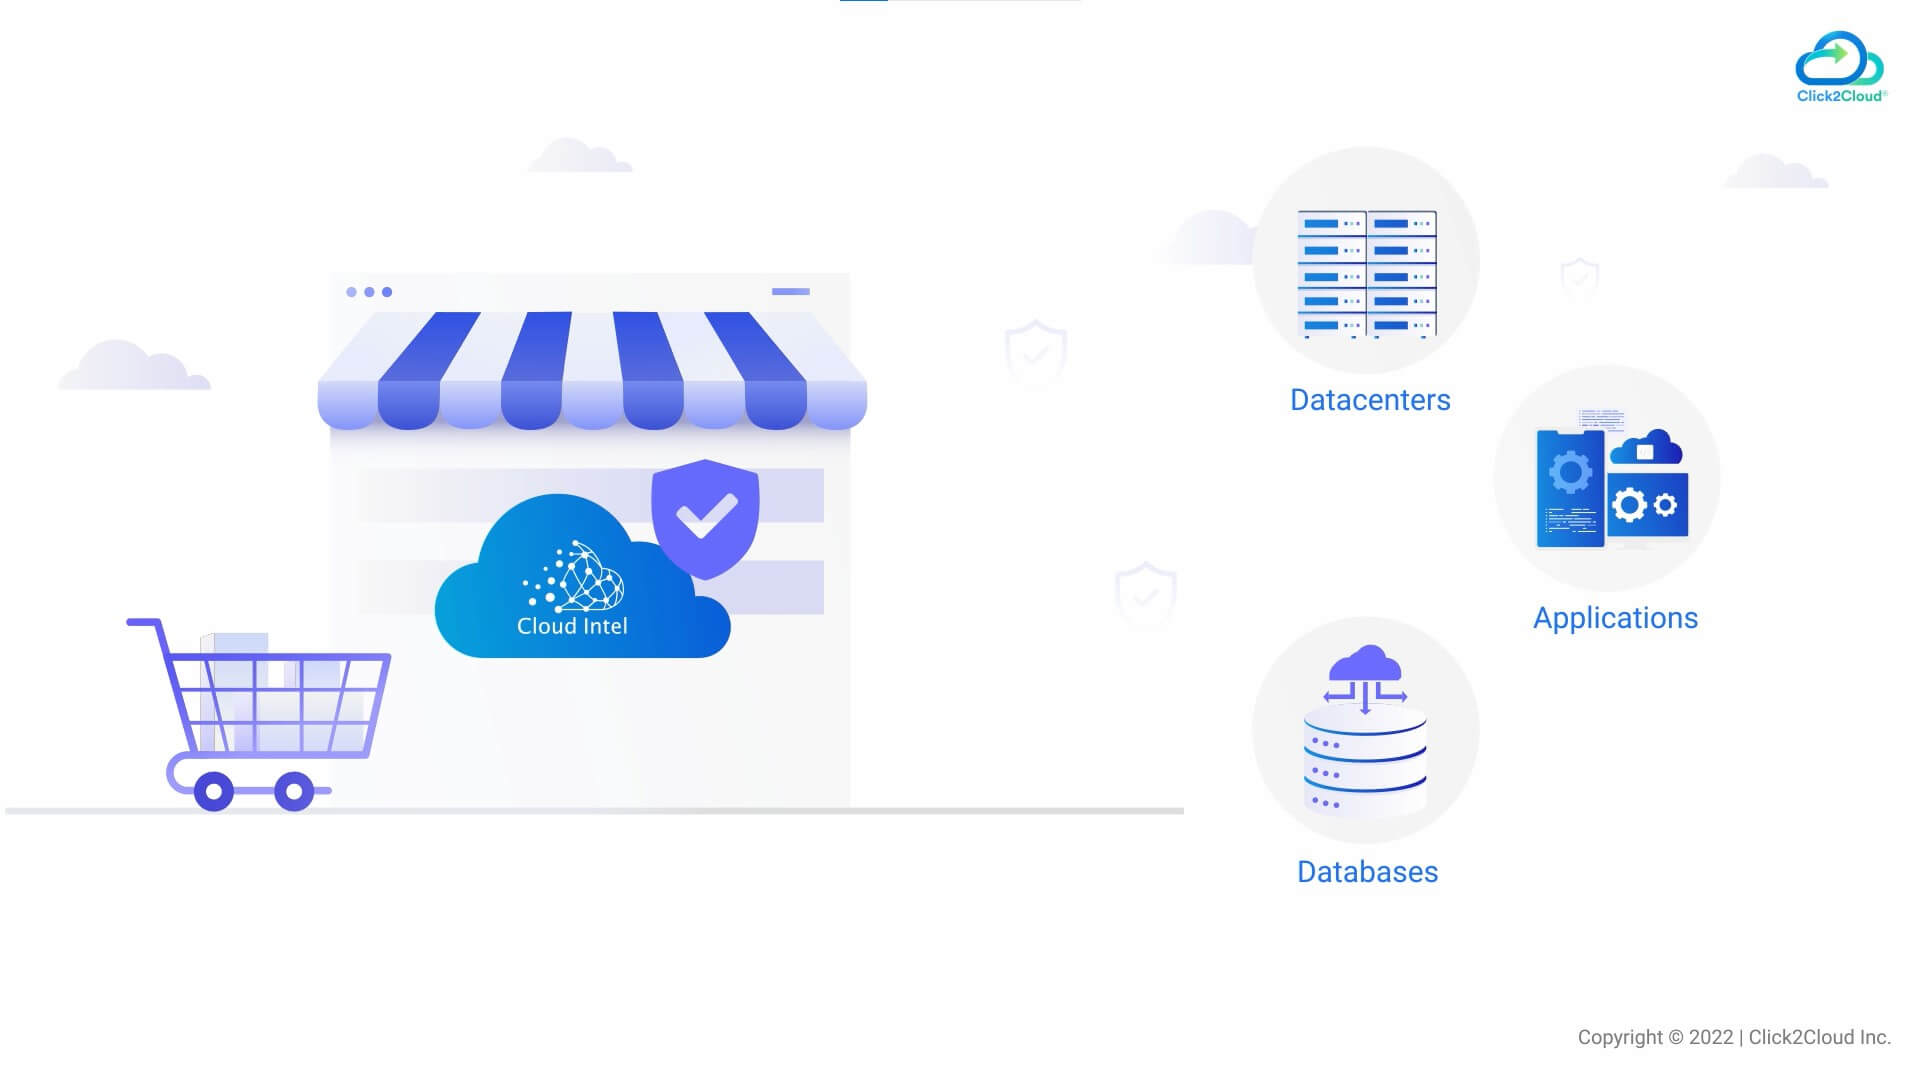 Cloud Intel - A Catalyst for Innovation in Retail Sector-Click2Cloud